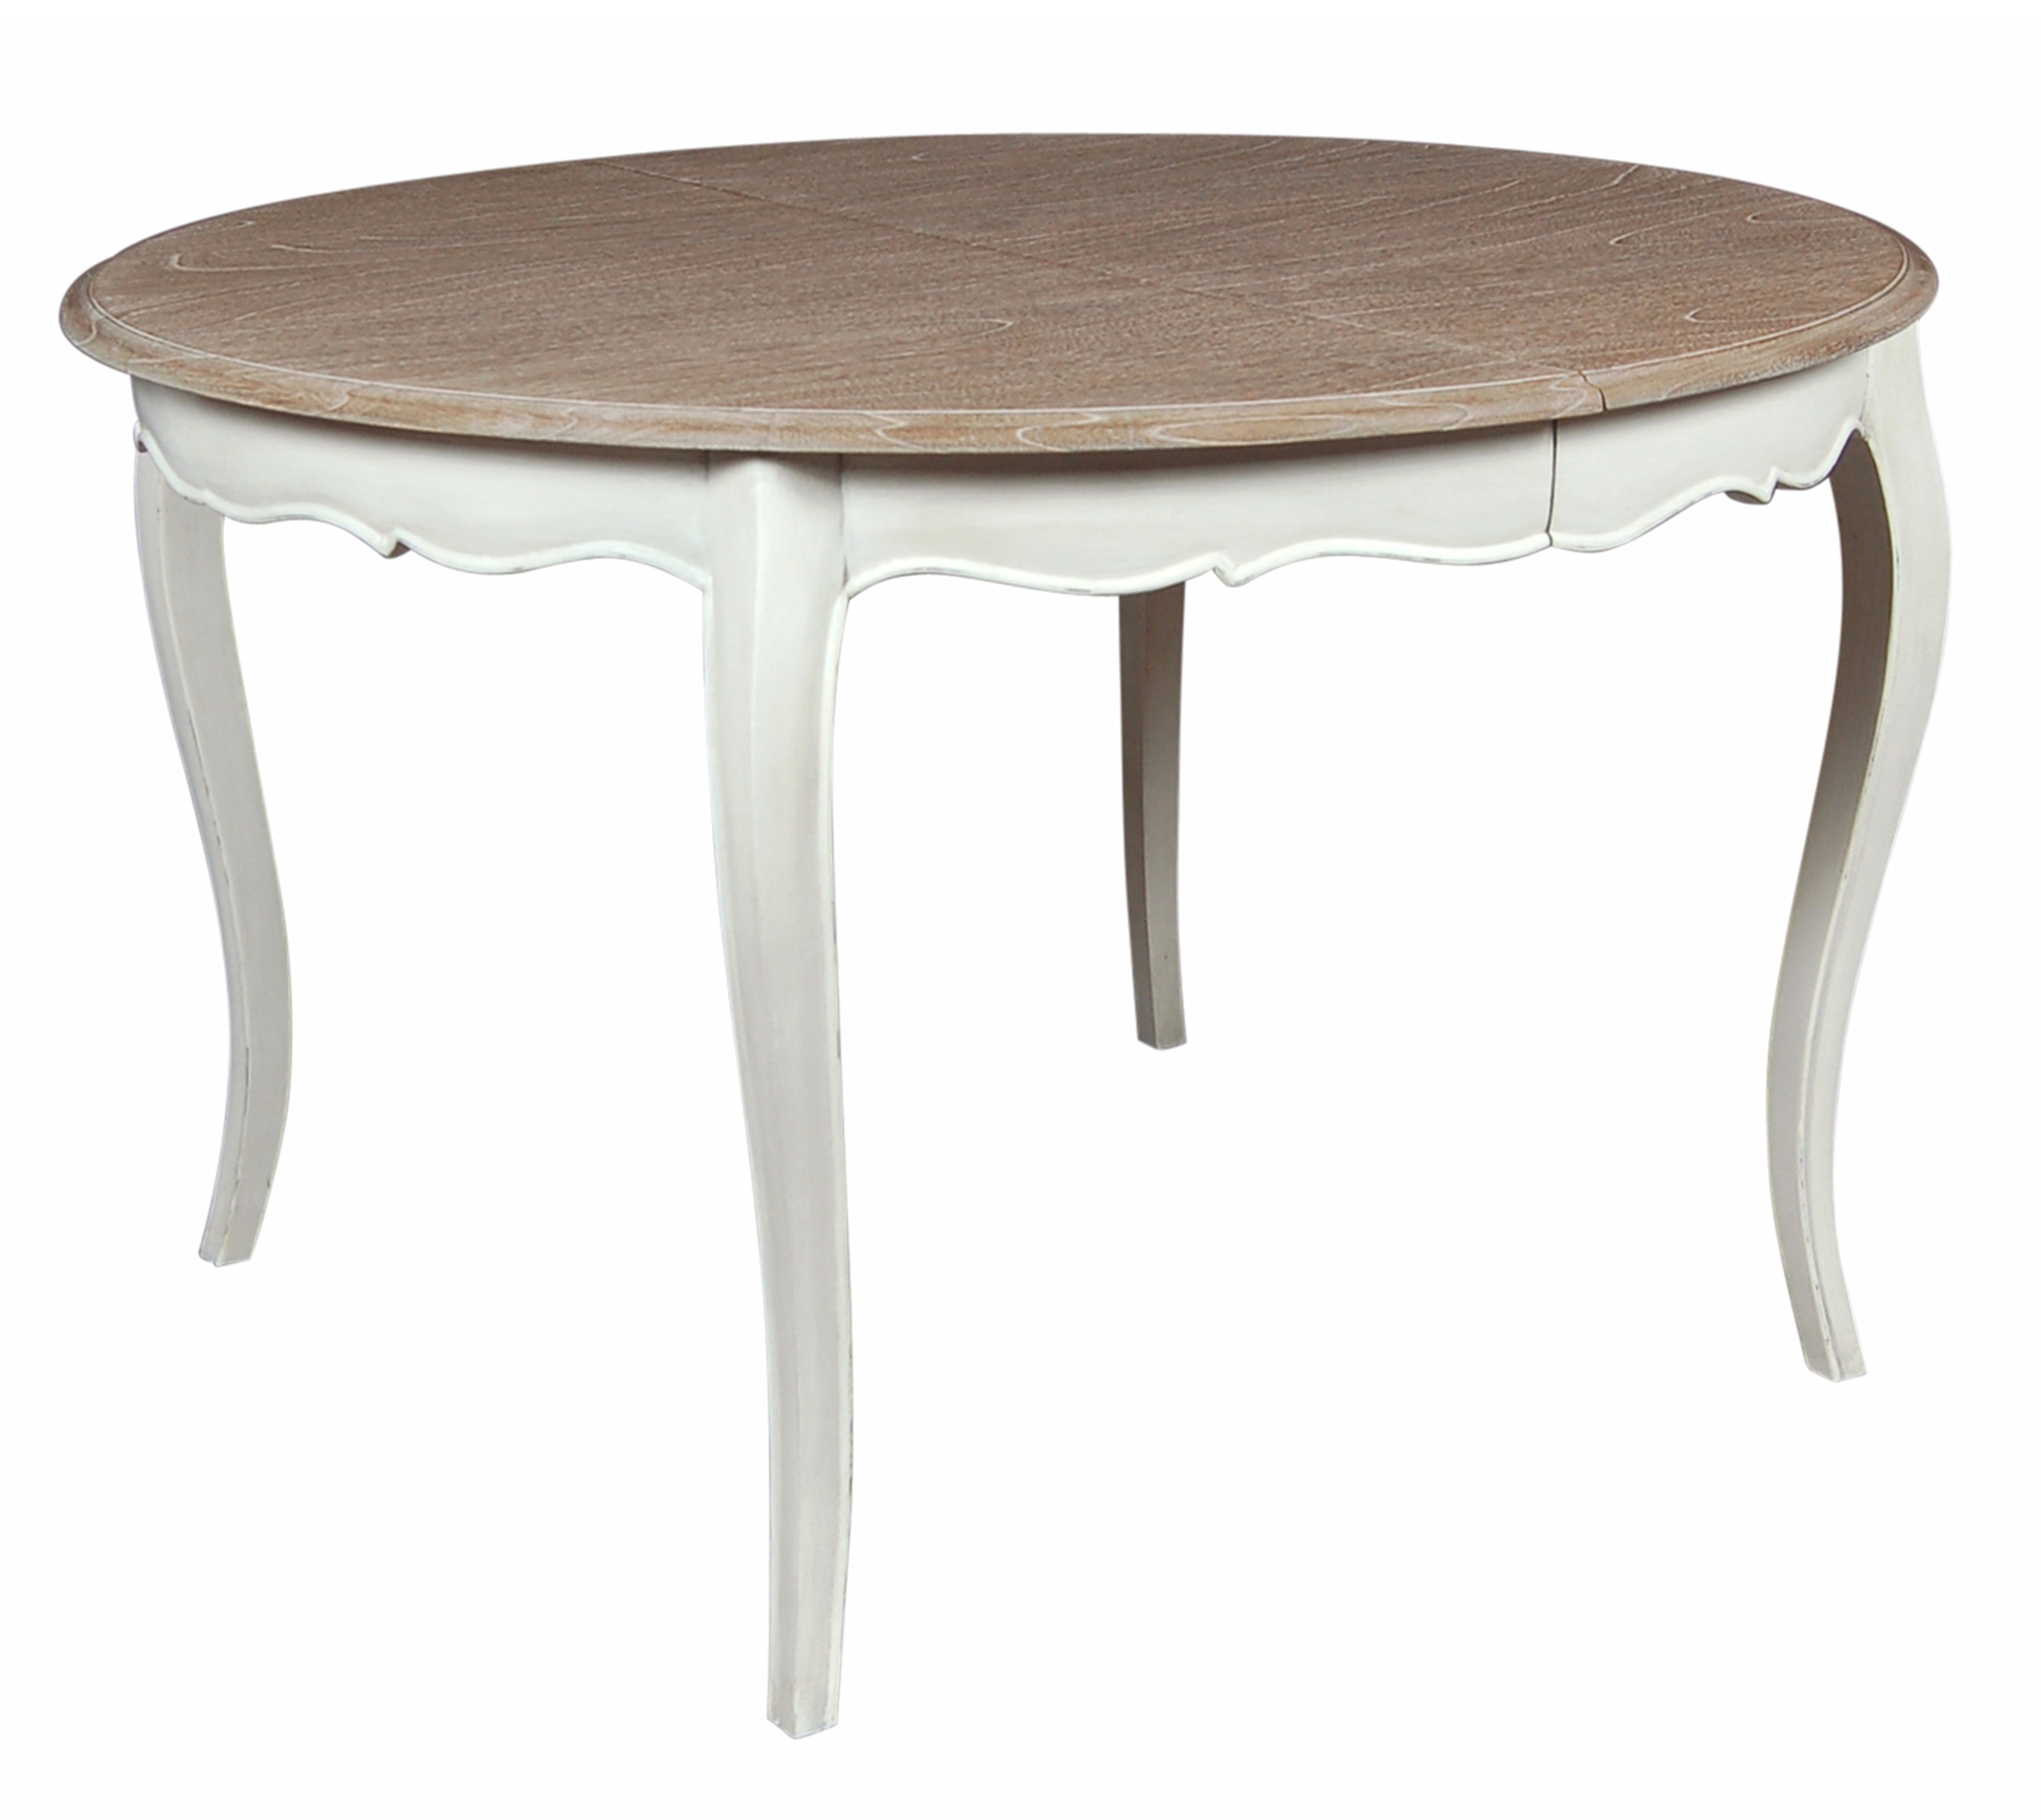 3500x3121px 7 Unique Round Extendable Dining Table Picture in Furniture